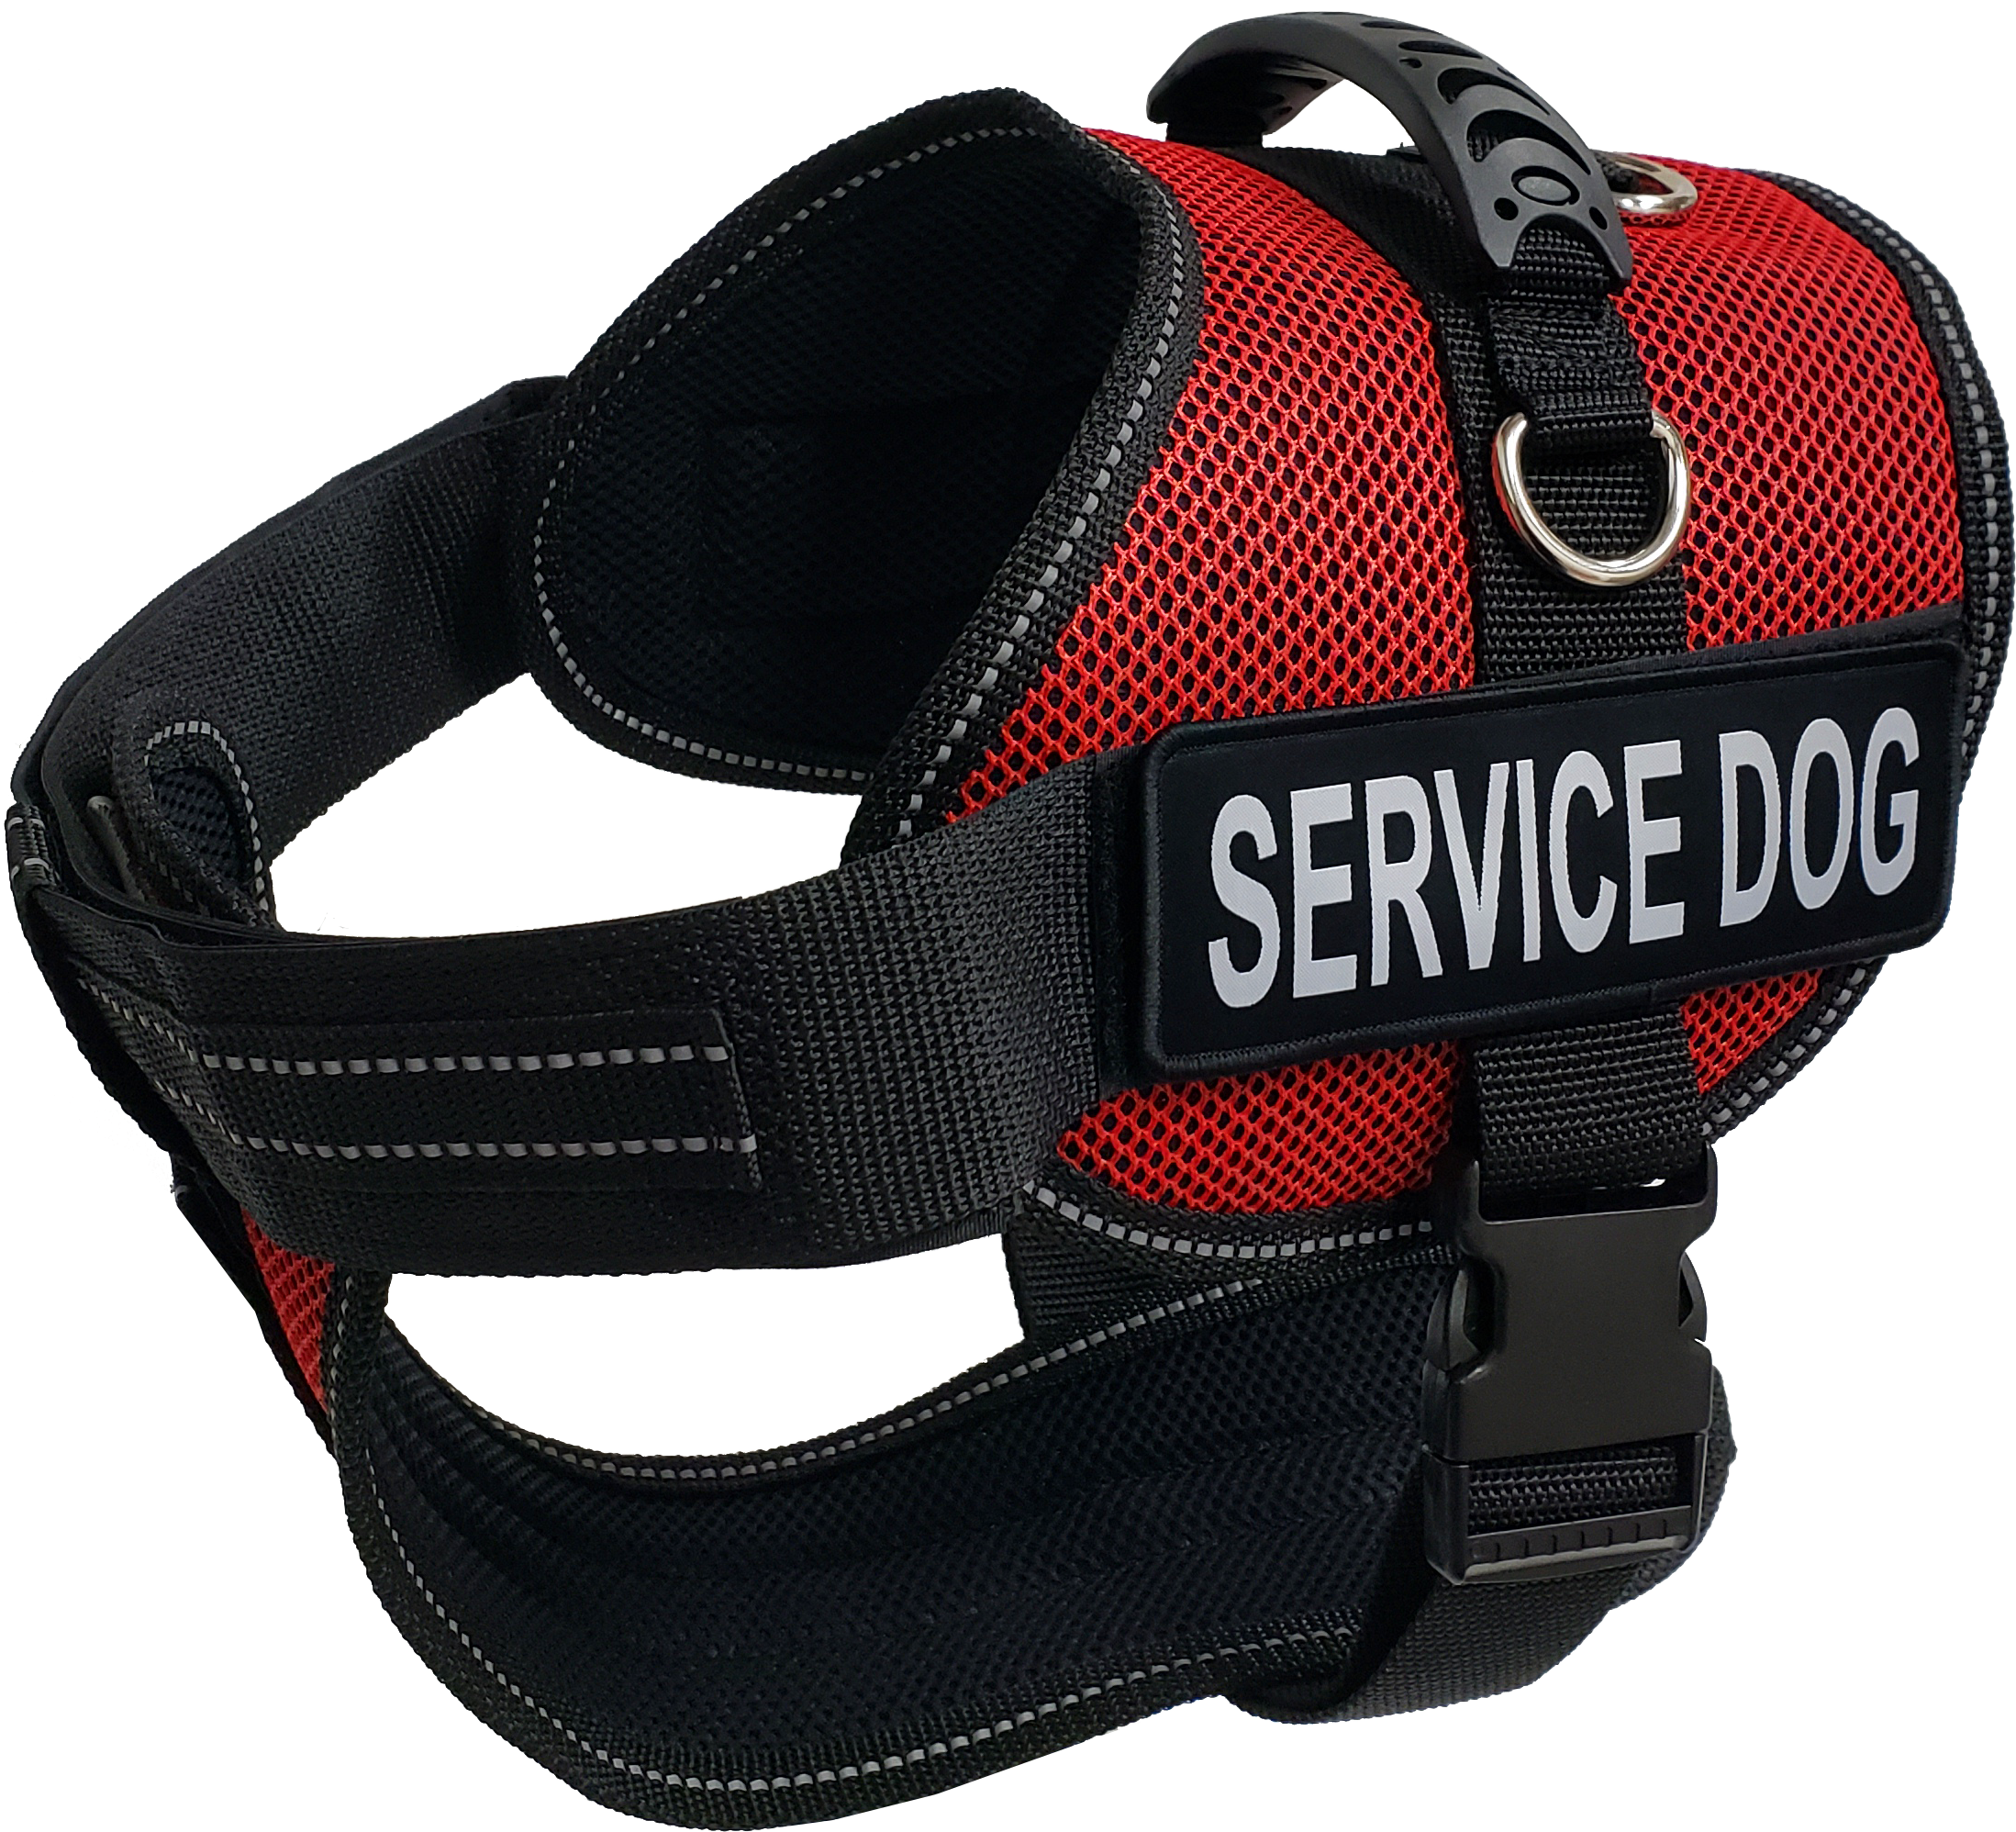 Shop Dog Gears, Equipments and Accessories